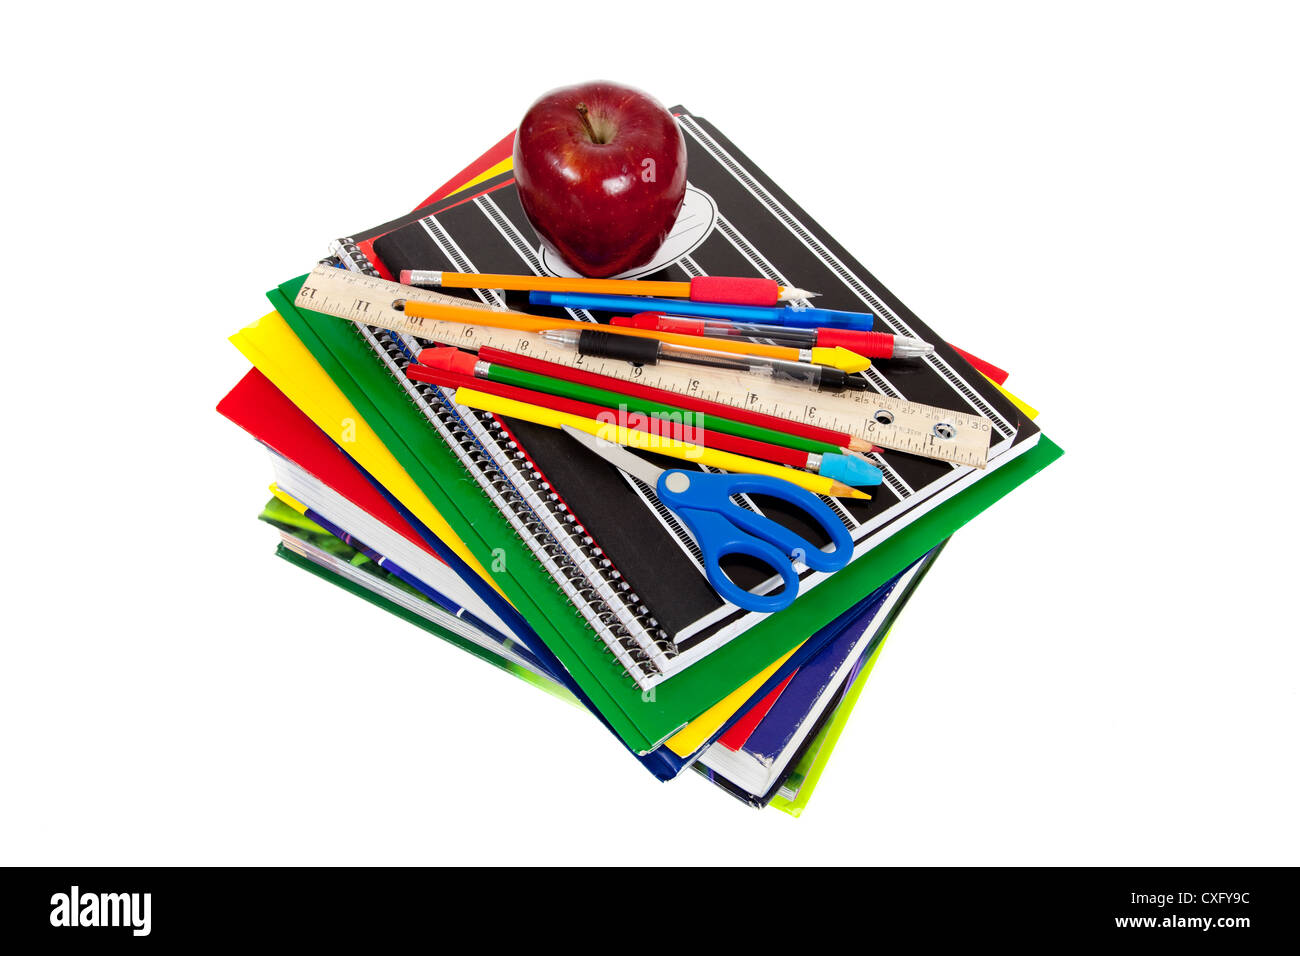 stack of school supplies with an apple Stock Photo